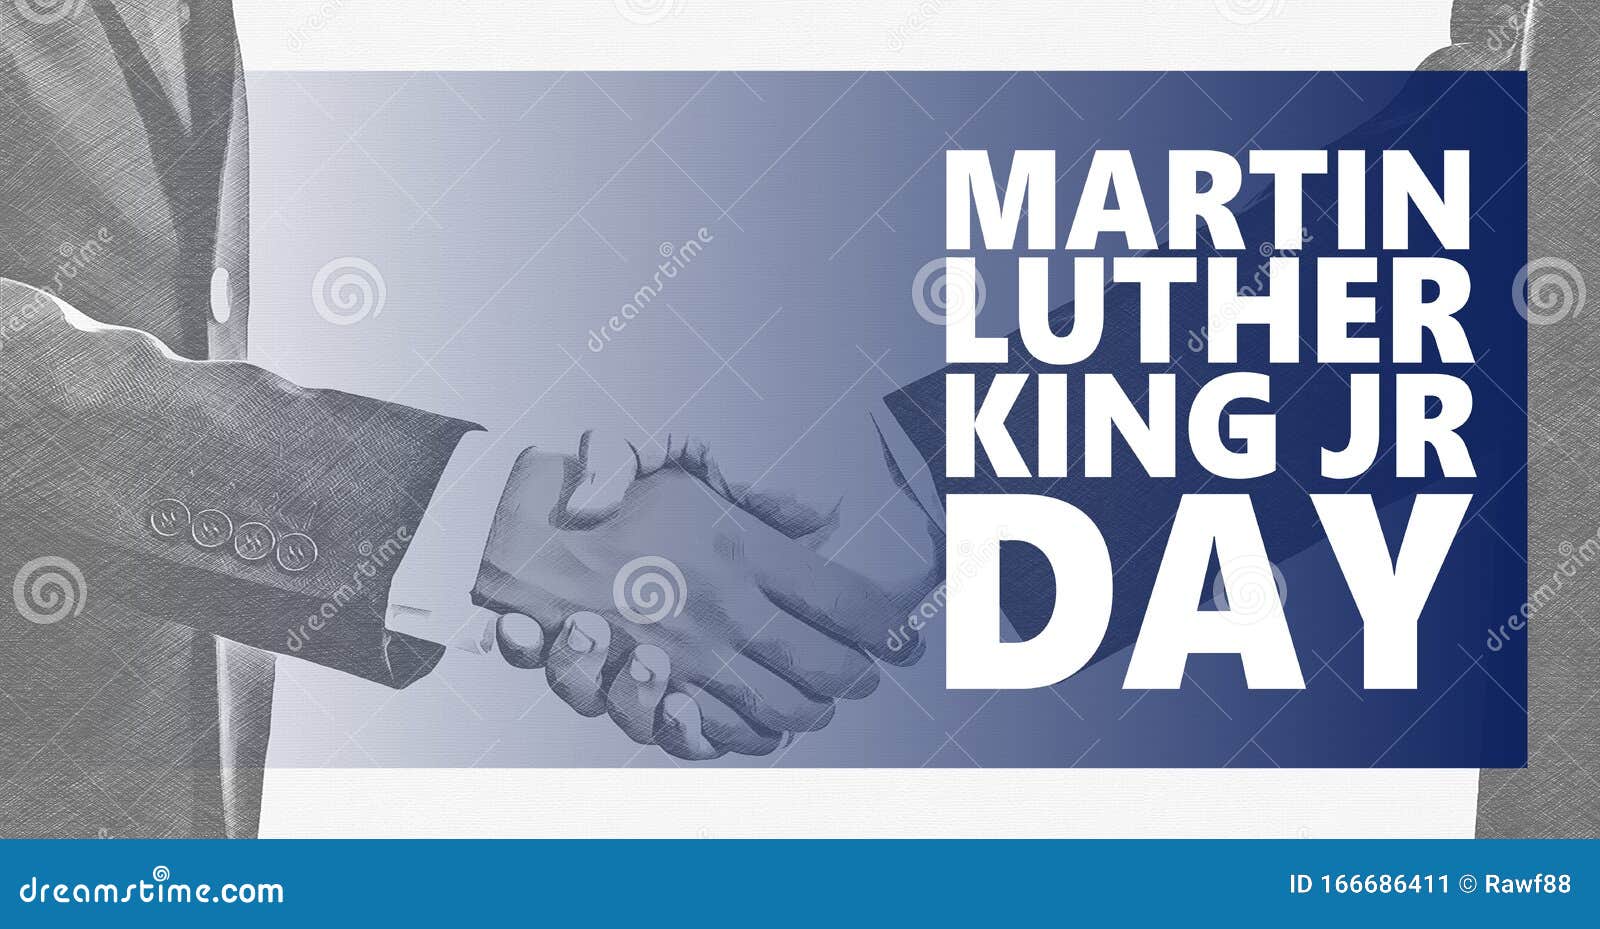 martin luther king jr day. white and black handshaking background